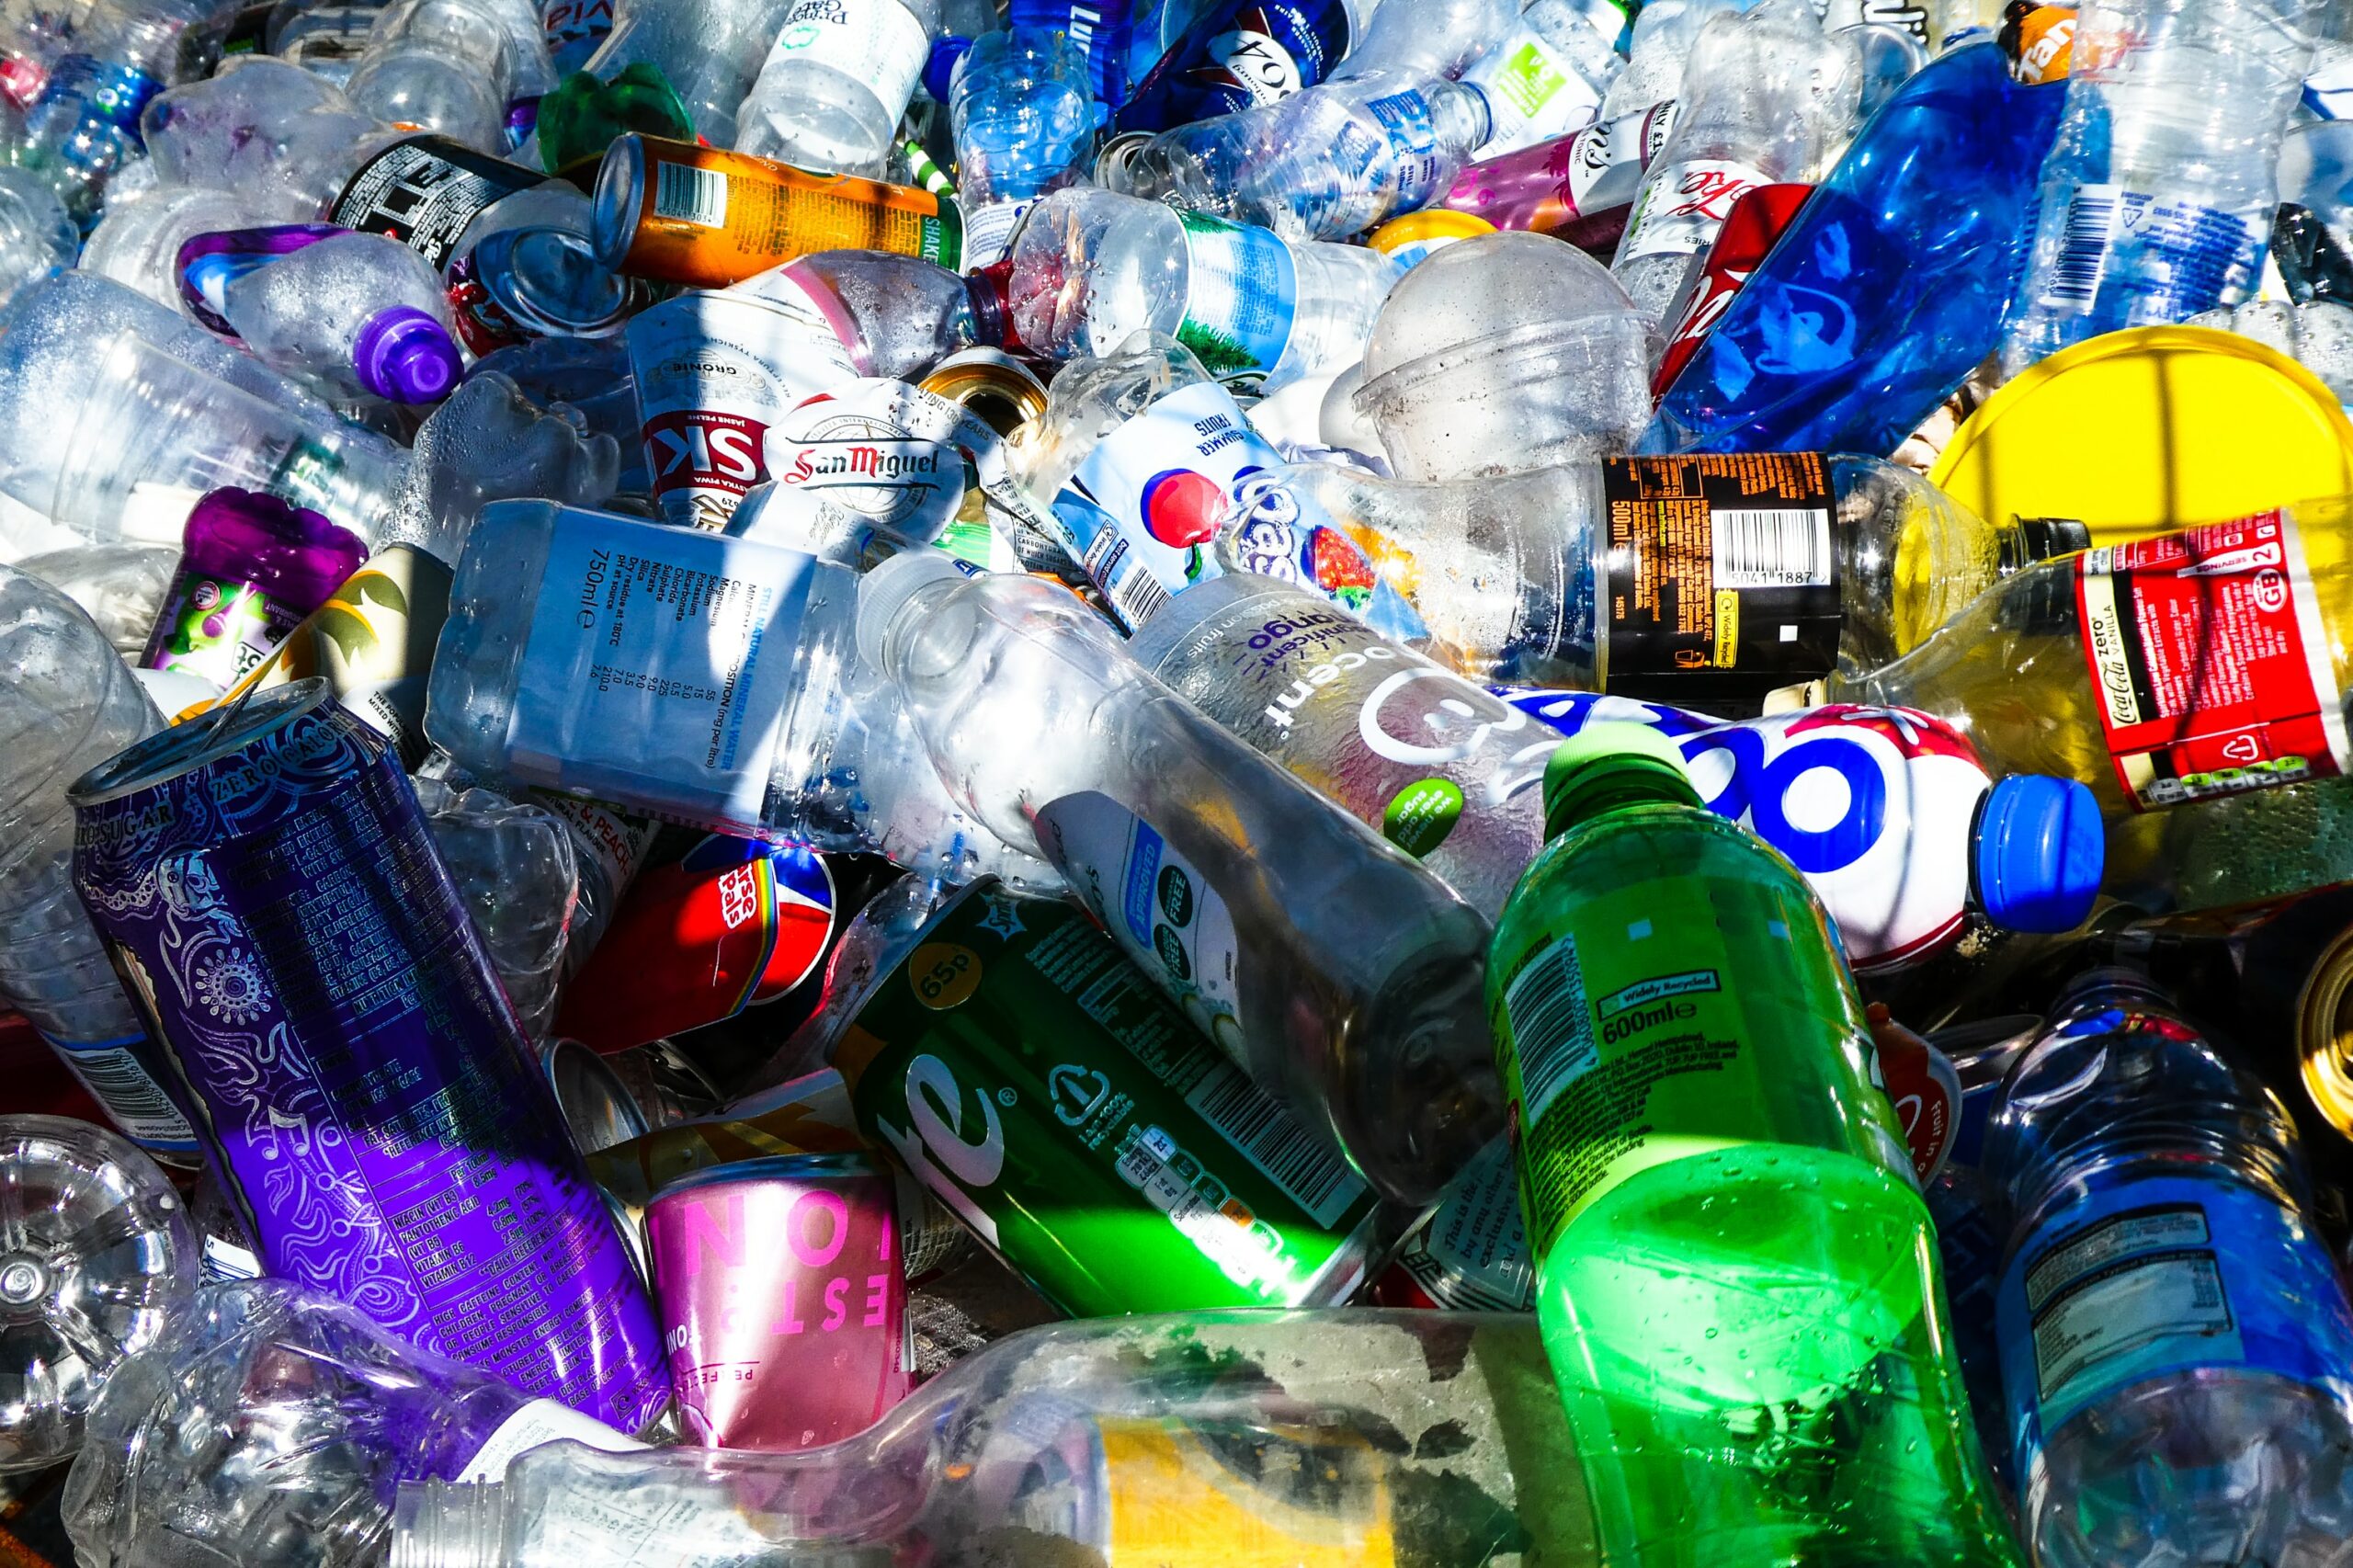 This photo is a close-up on recyclables. There are pop cans, plastic water bottles, and plastic containers piled on top of one another.